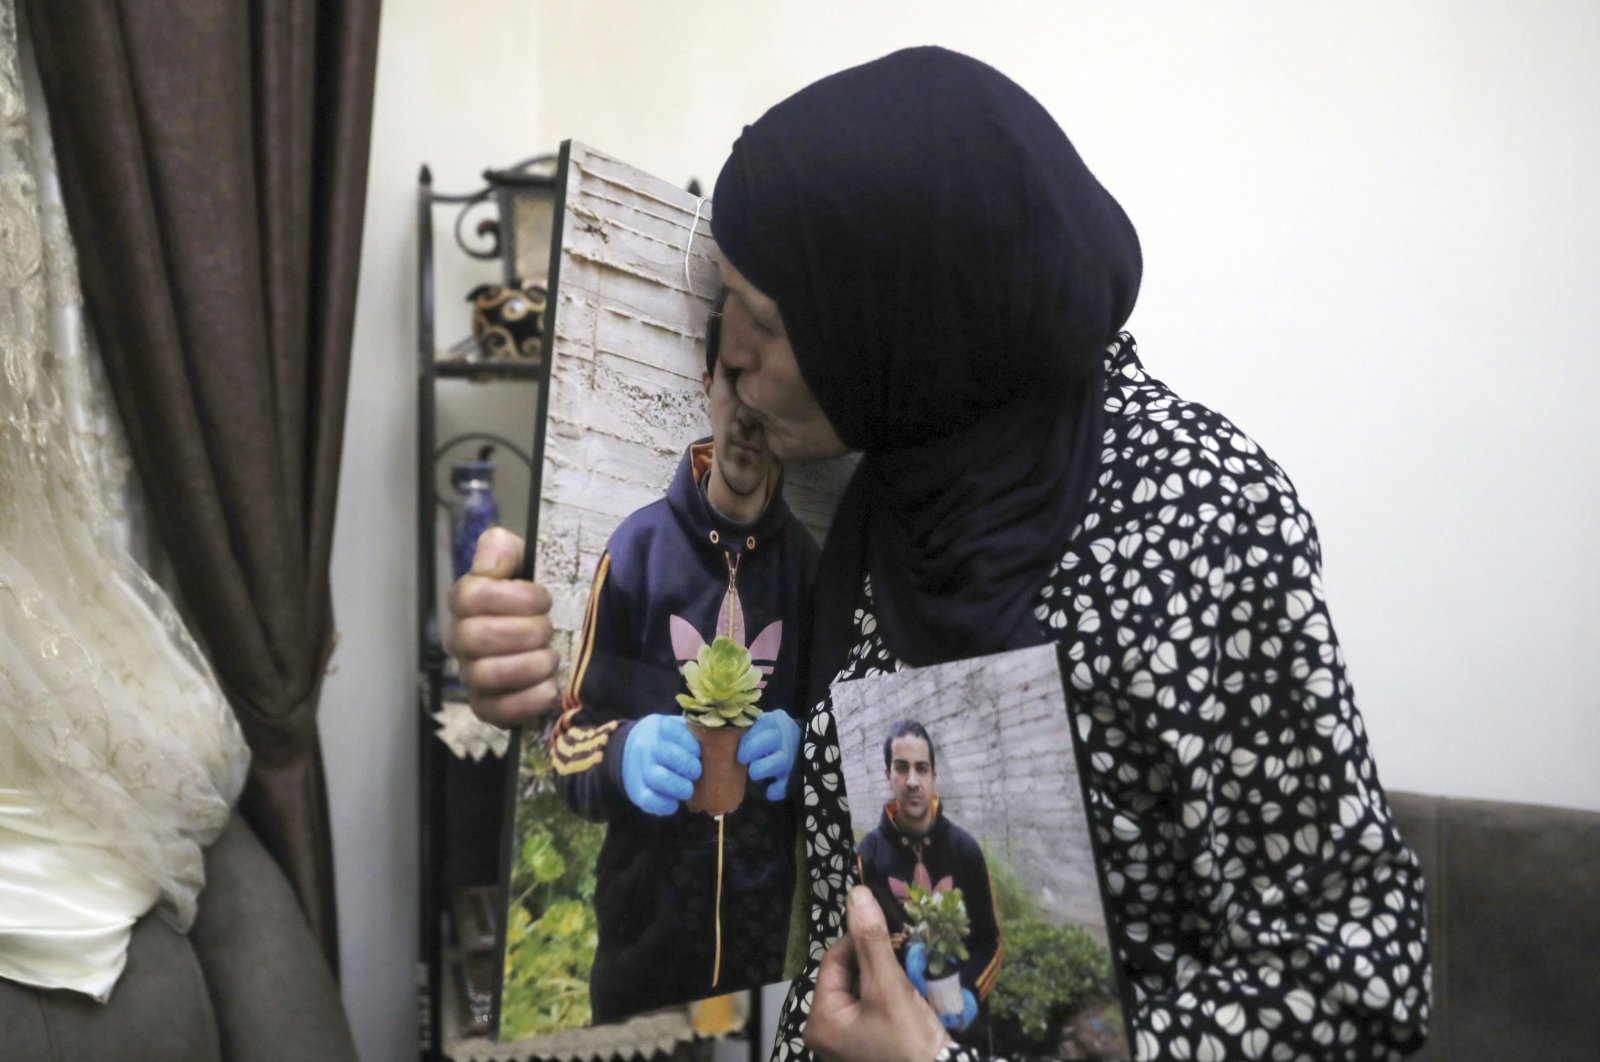 Rana kisses a photo of her son, Eyad Hallaq, in their home in Wadi Joz, a Palestinian neighborhood in east Jerusalem, June 3, 2020. (AP Photo)